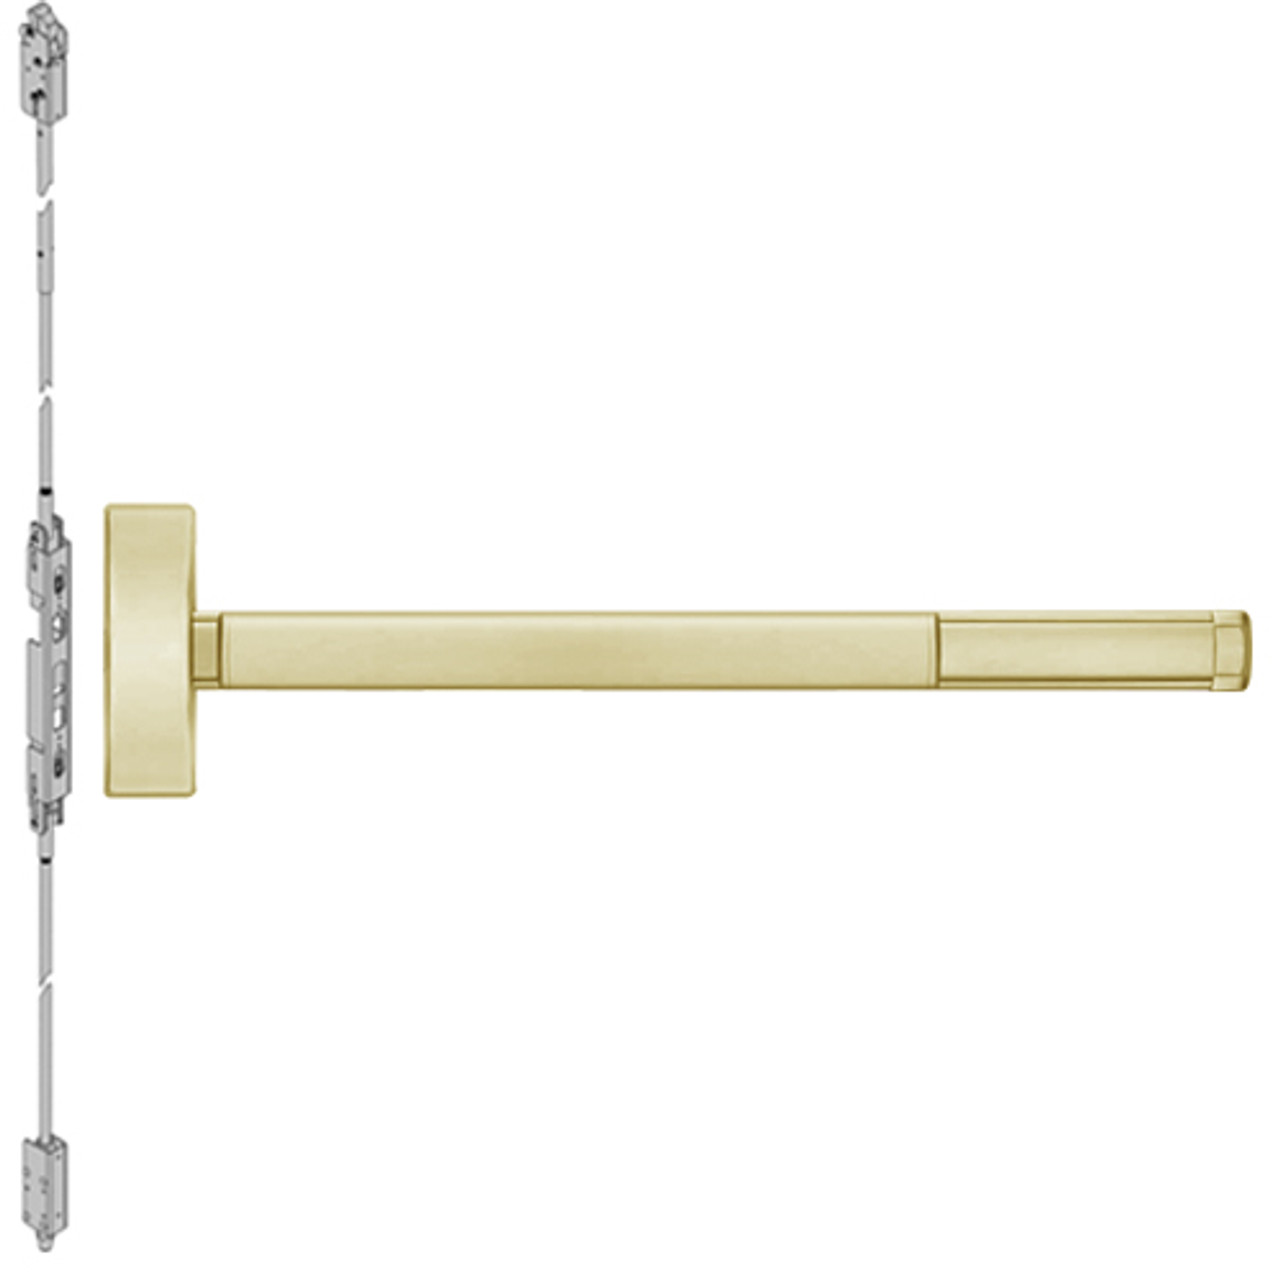 ELR2808LBR-606-36 PHI 2800 Series Concealed Vertical Rod Exit Device with Electric Latch Retraction Prepped for Key Controls Lever-Knob in Satin Brass Finish